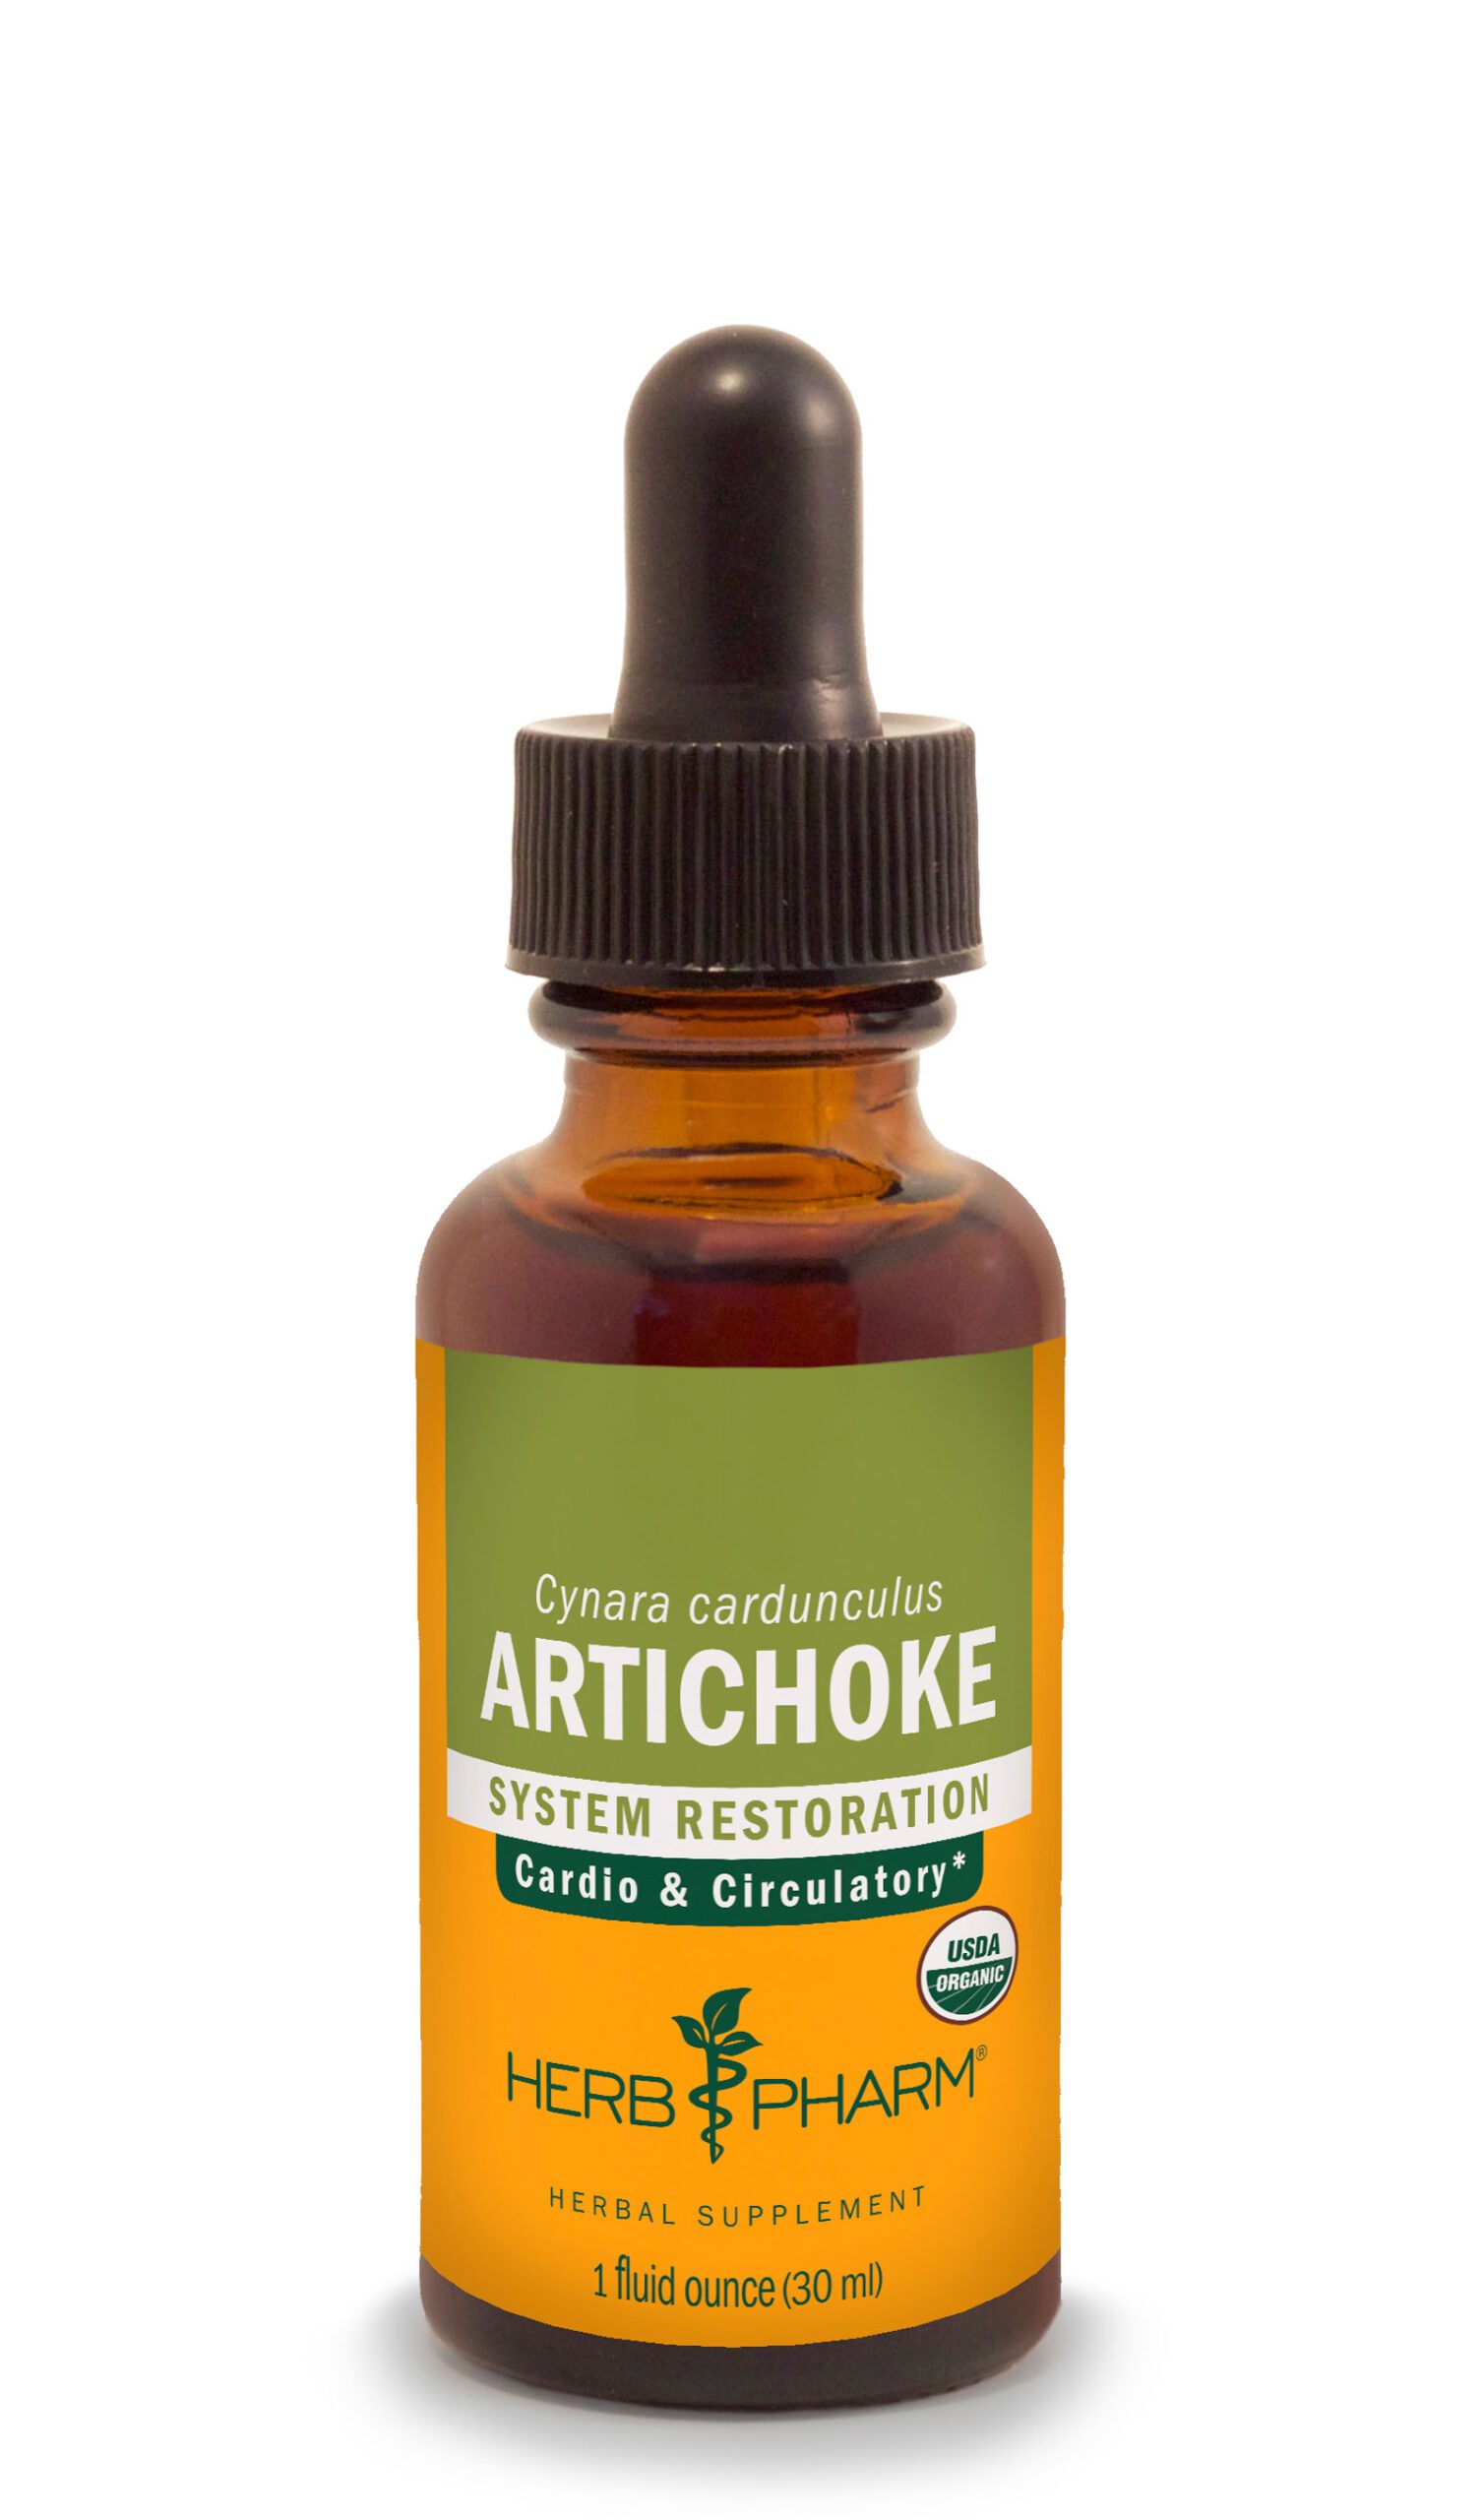 Product Listing Image for Herb Pharm Artichoke Tincture